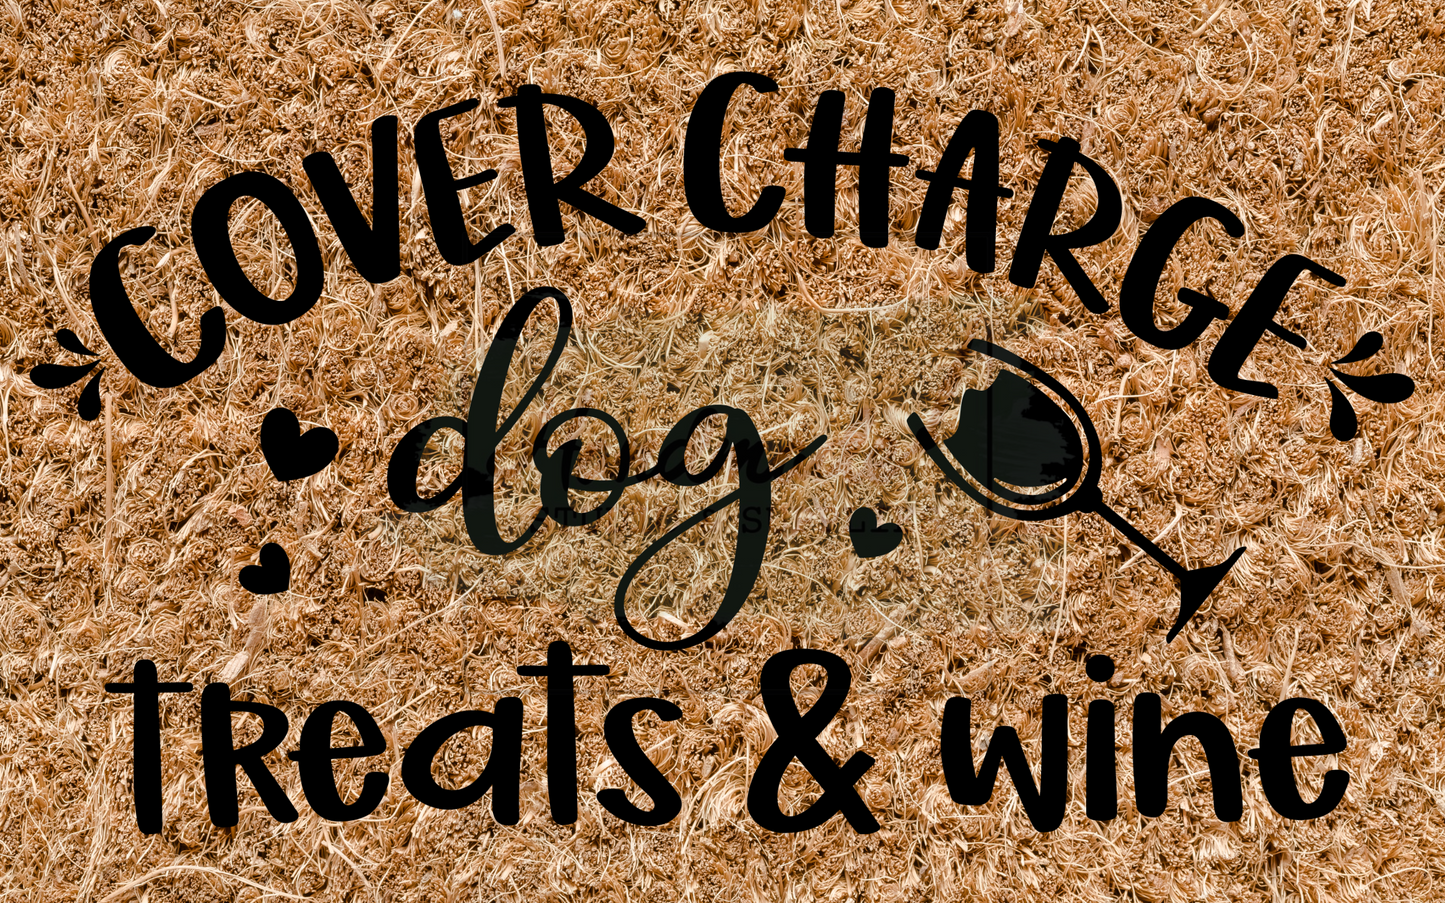 Cover charge - dog treats and wine